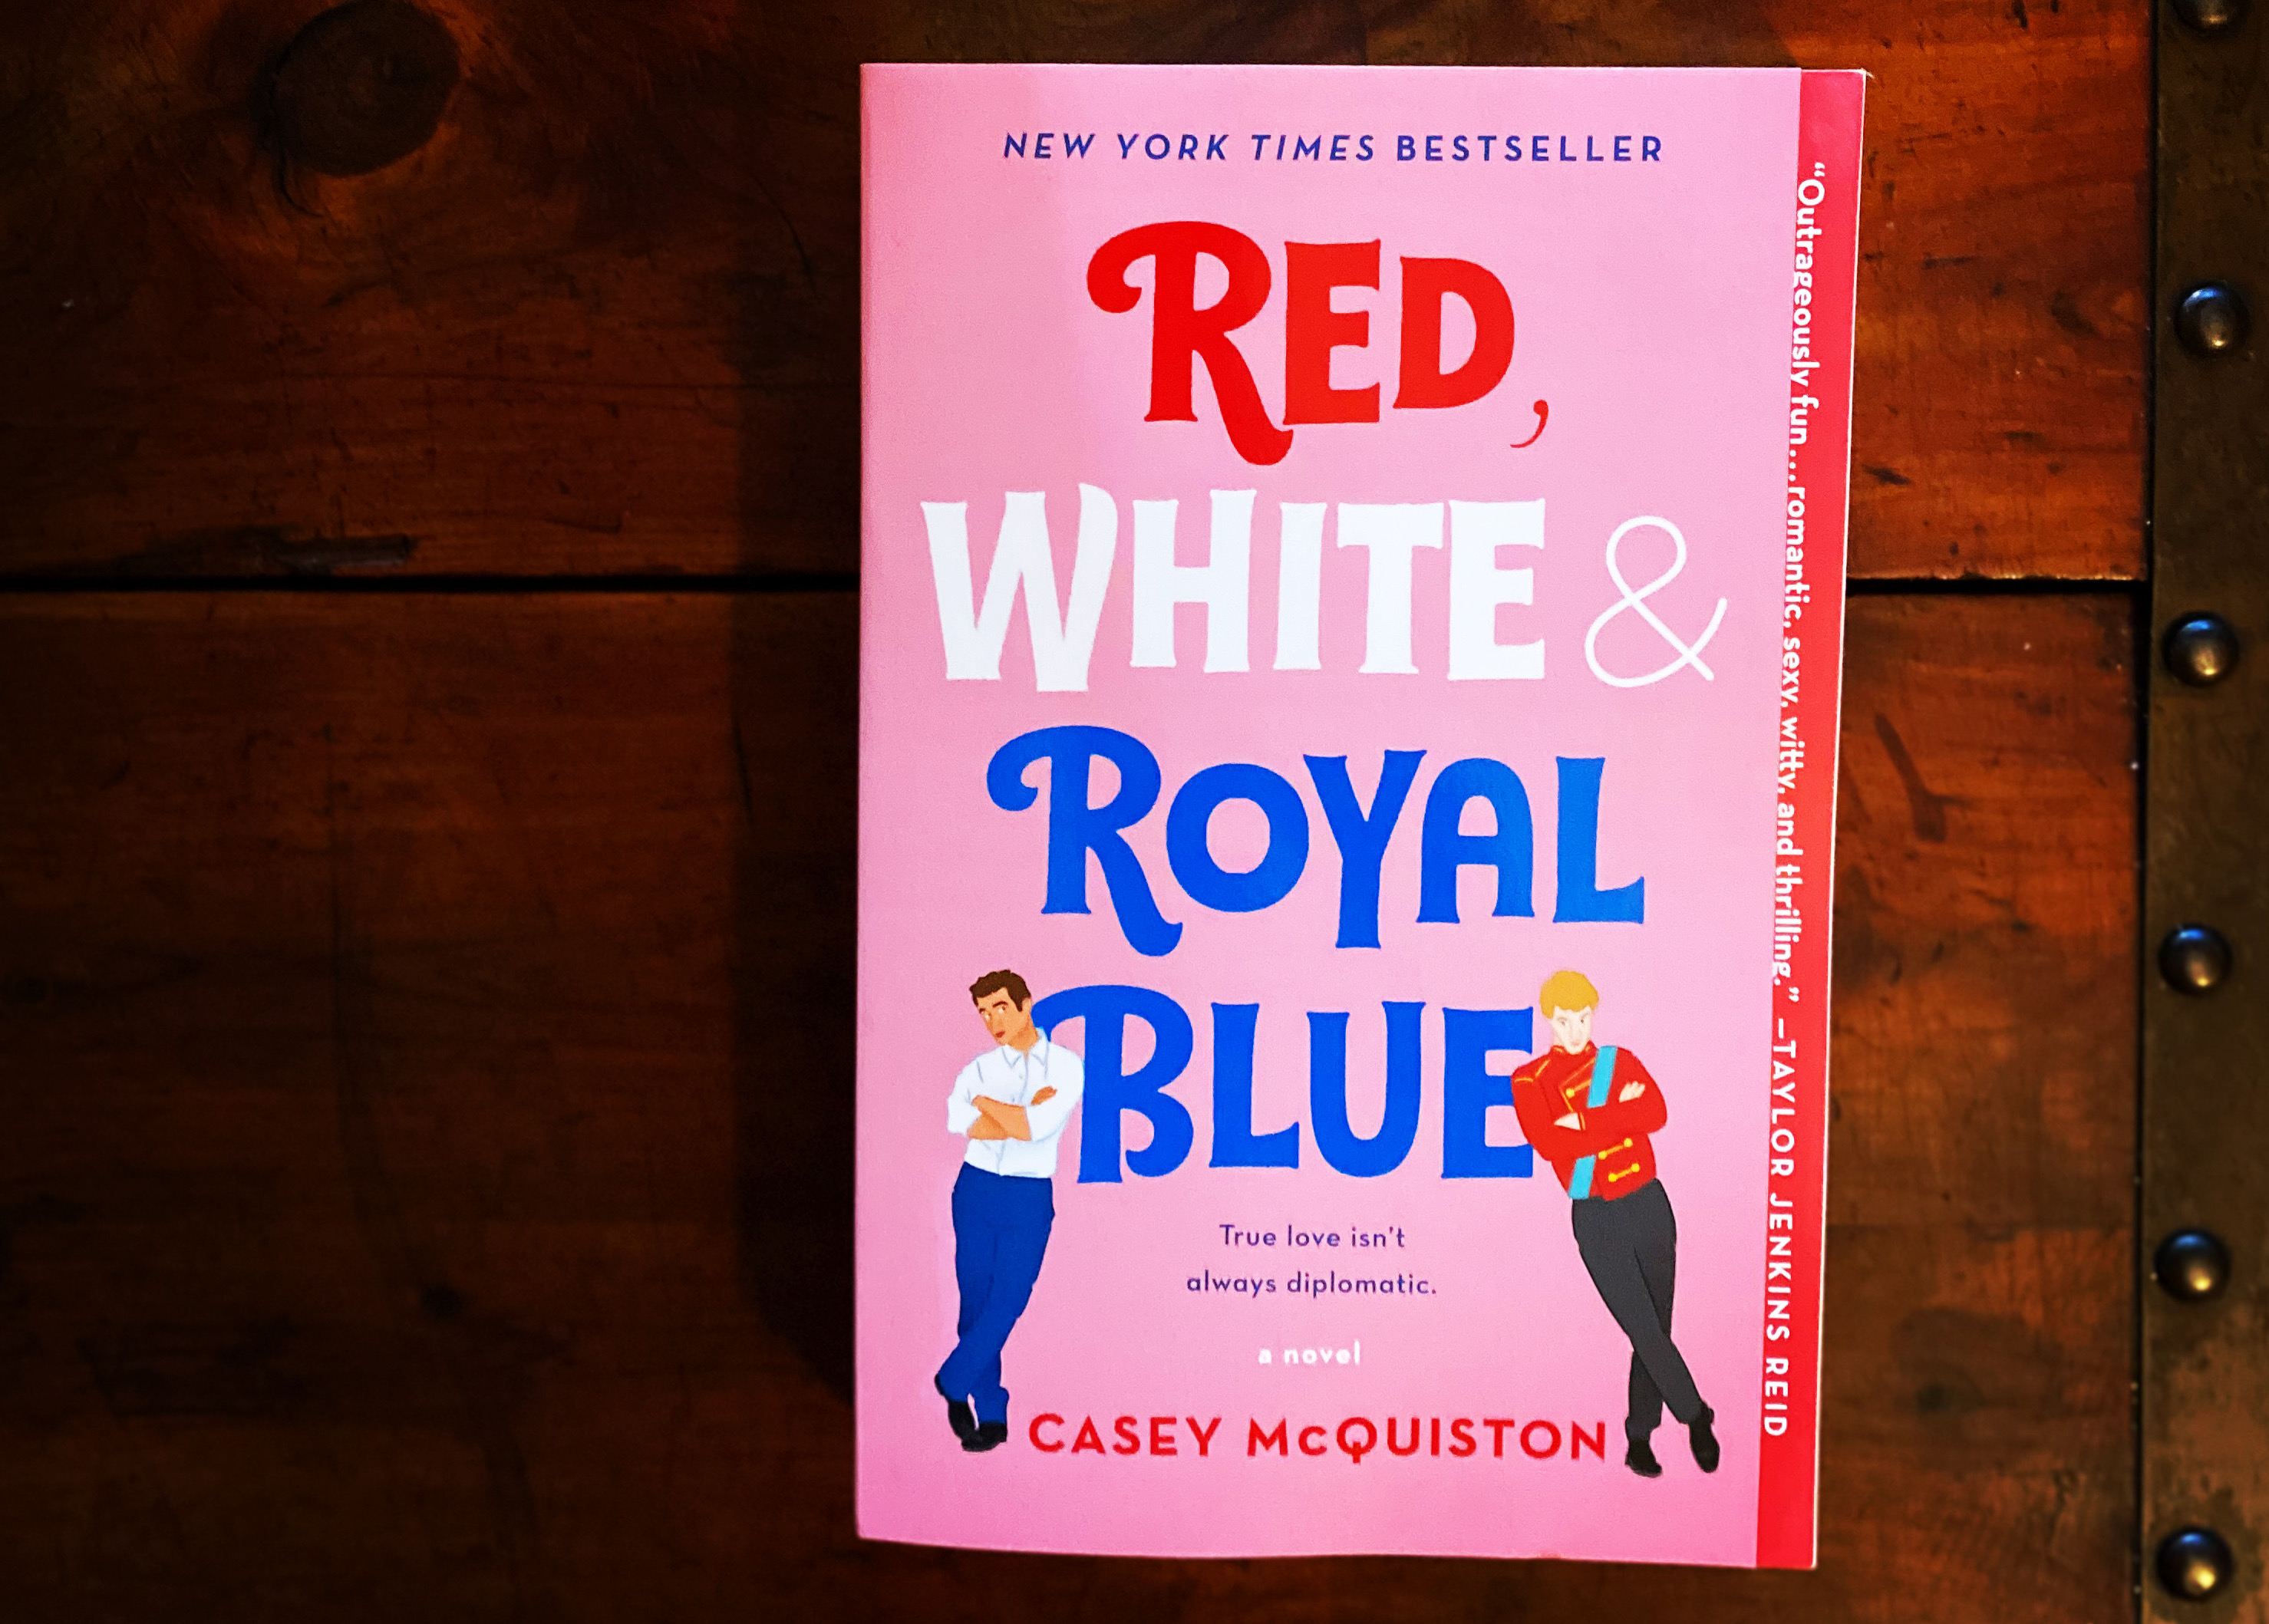 Book review of “Red, White & Royal Blue” - The Lutrinae